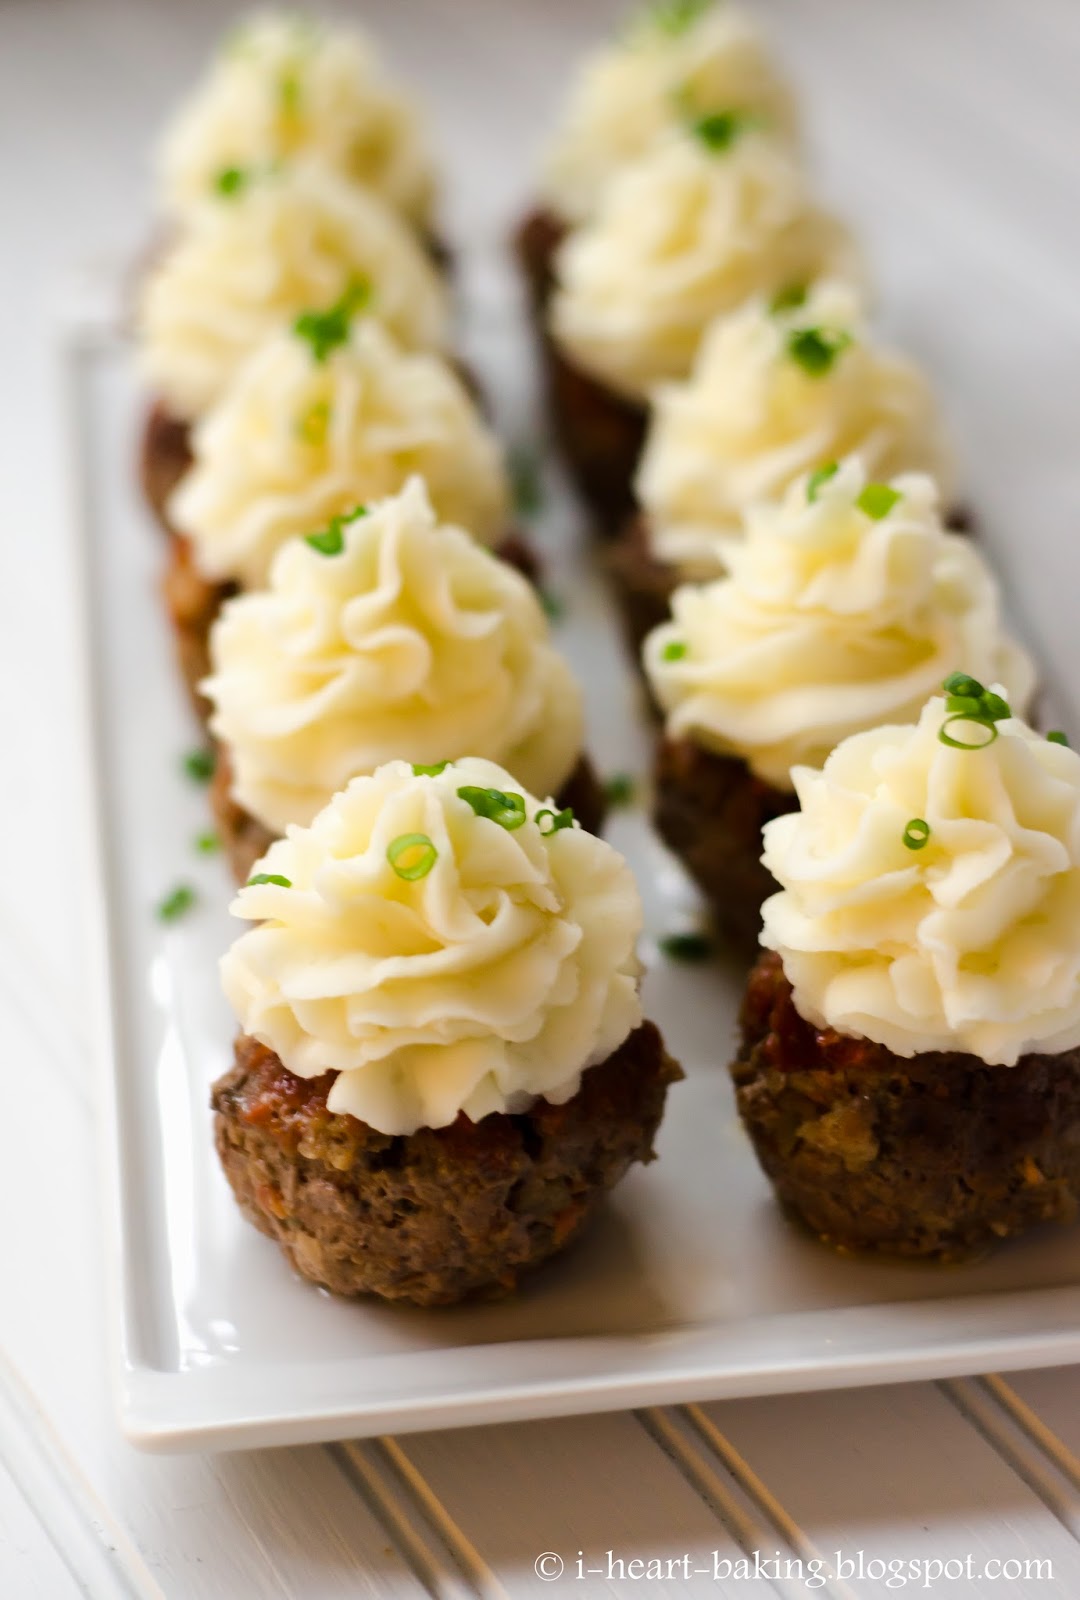 i heart baking!: meatloaf cupcakes with mashed potato frosting